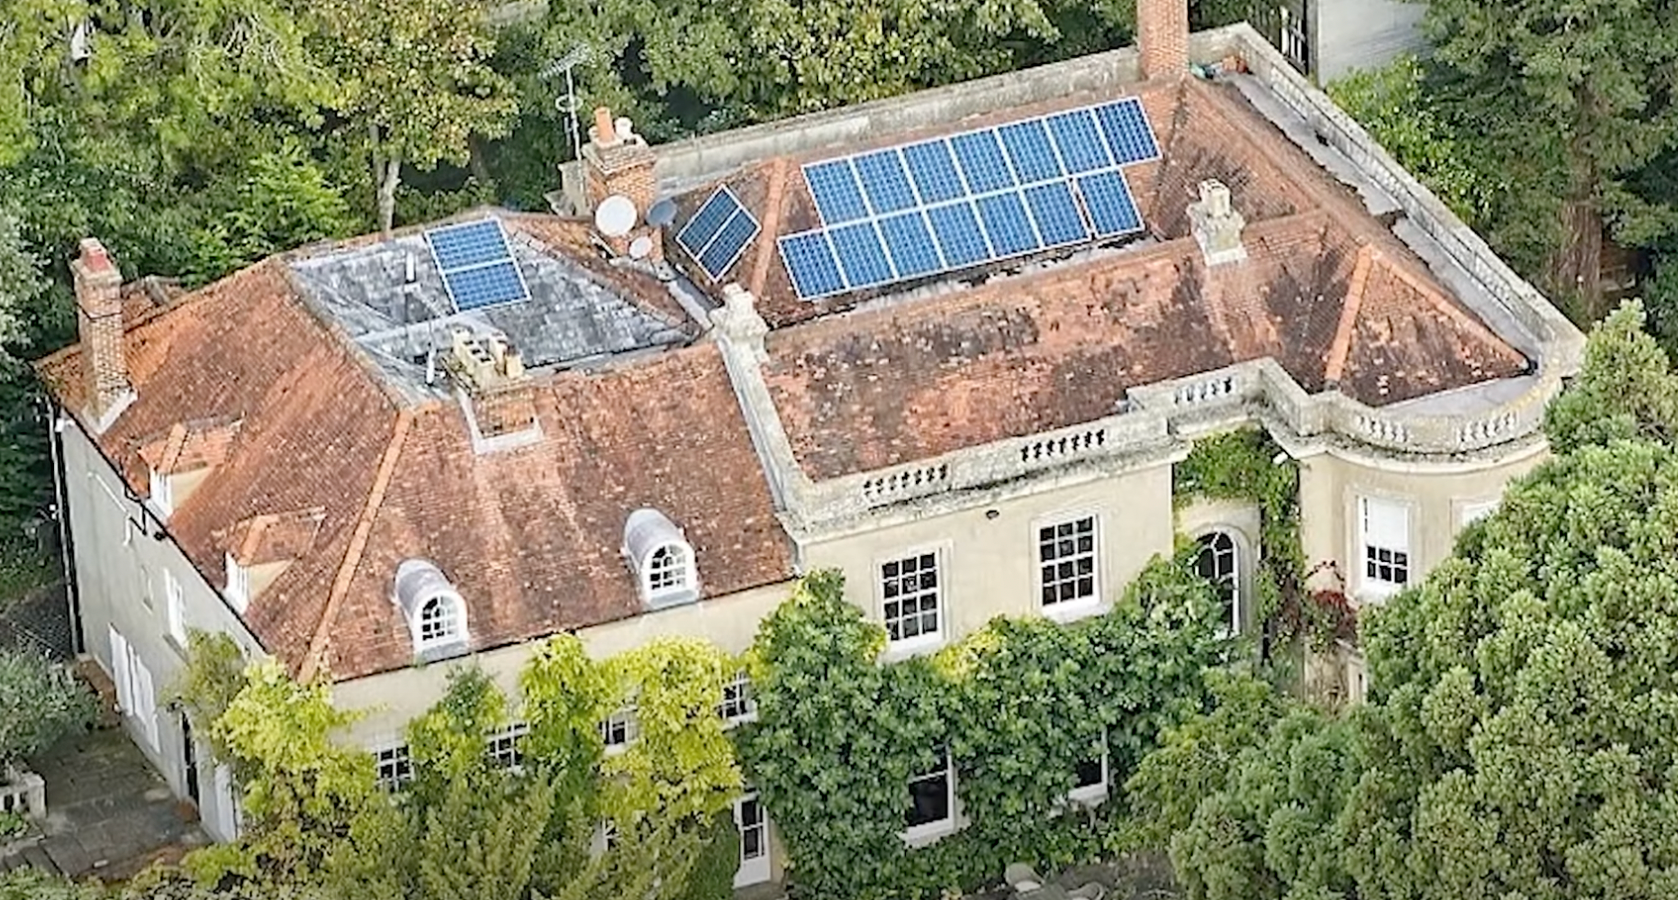 An overview of George and Amal Clooney's mansion at River Thames in London, United Kingdom | Source: YouTube@FamousEntertainment